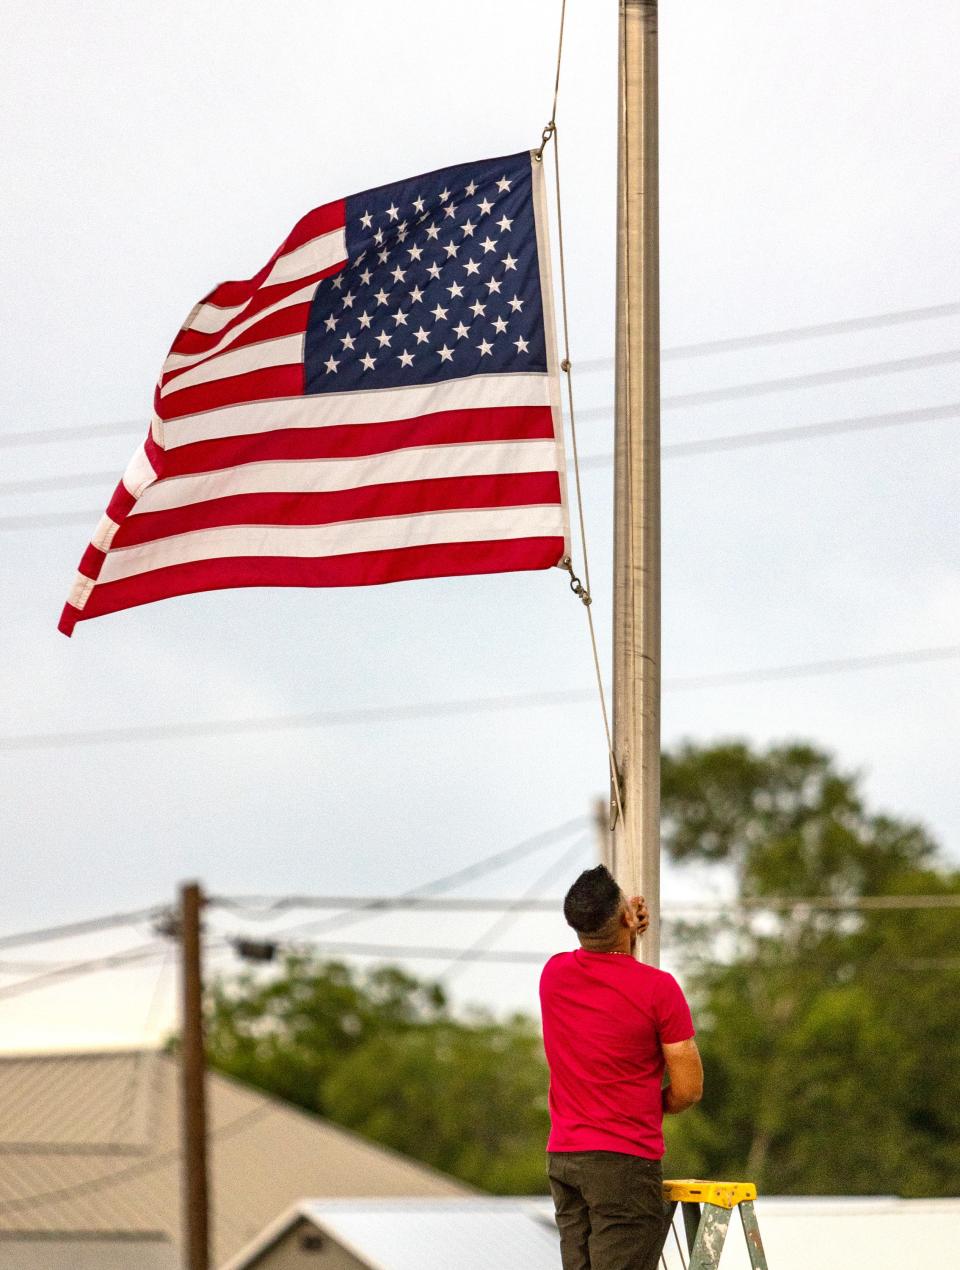 Janish Patel lowers the flag to half staff Tuesday, May 24, 2022, at his Uvalde, Texas, hotel hours after a gunman entered Robb Elementary School in Uvalde and killed multiple children and adults.